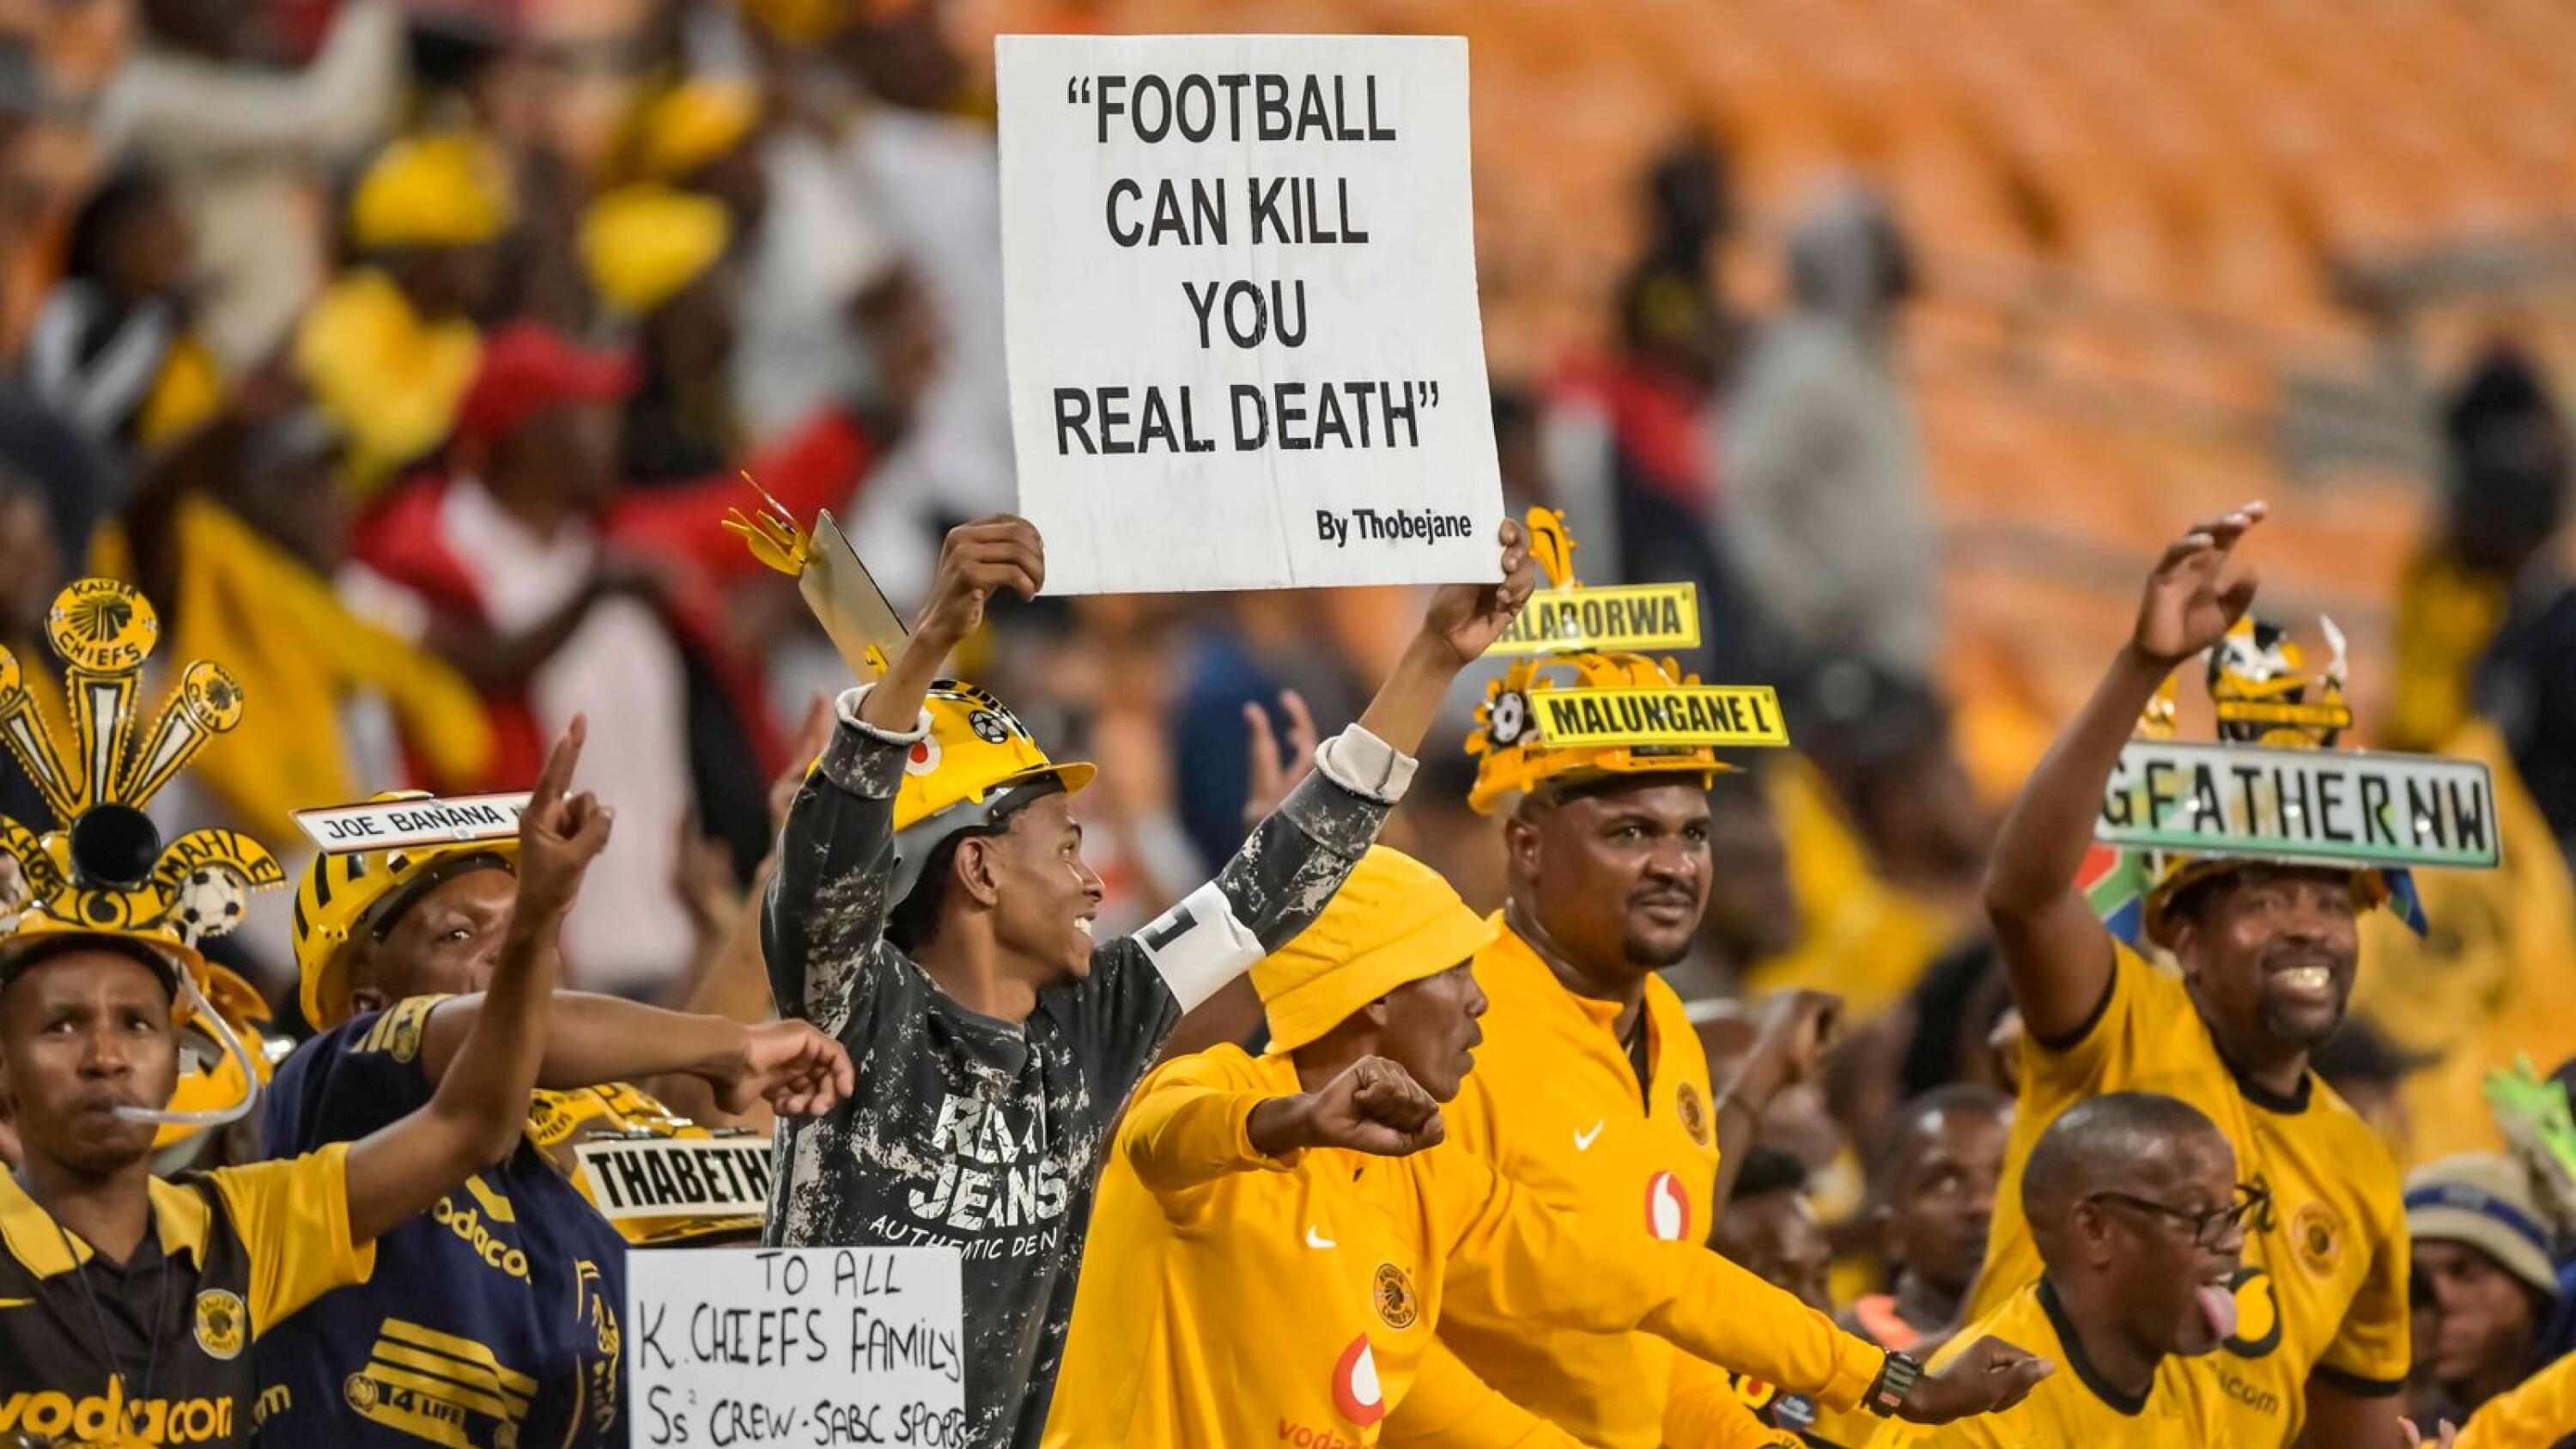 Kaizer Chiefs supporters celebrating there first goal hduring the DStv Premiership 2022/23 match between Kaizer Chiefs and Marumo Gallants FC held at the FNB Stadium in Johannesburg